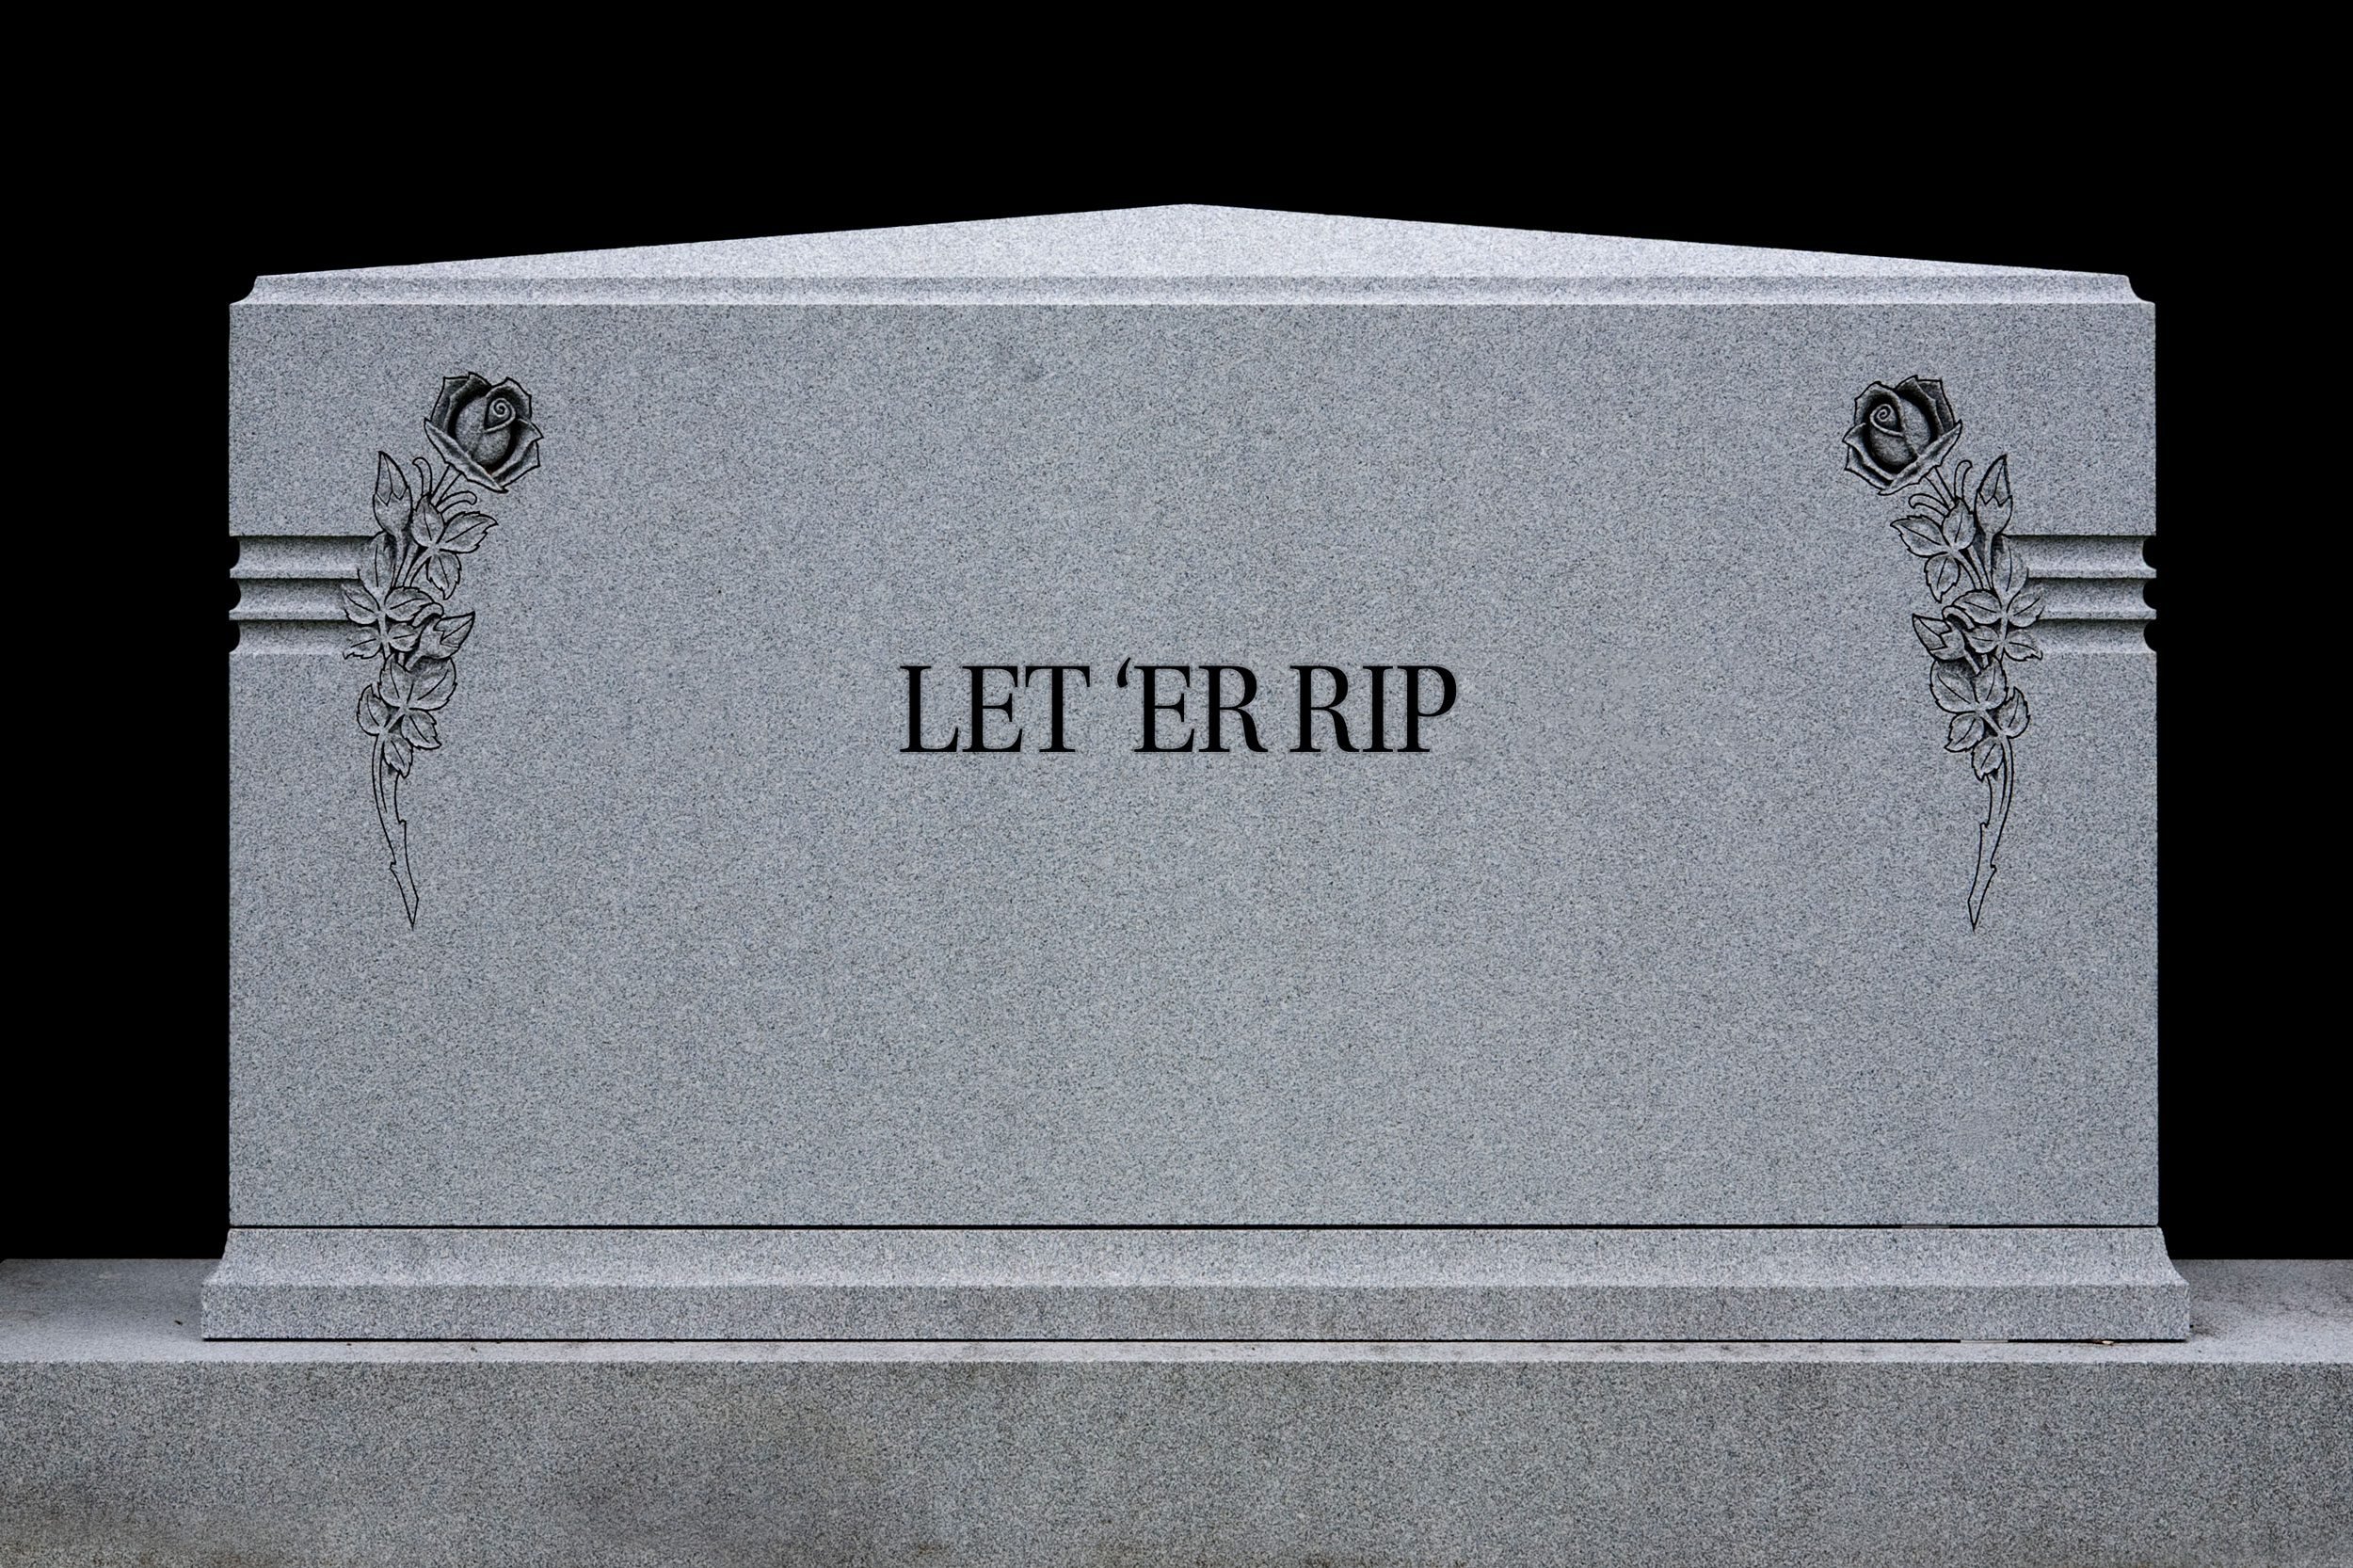 tombstone: "Let 'er rip"